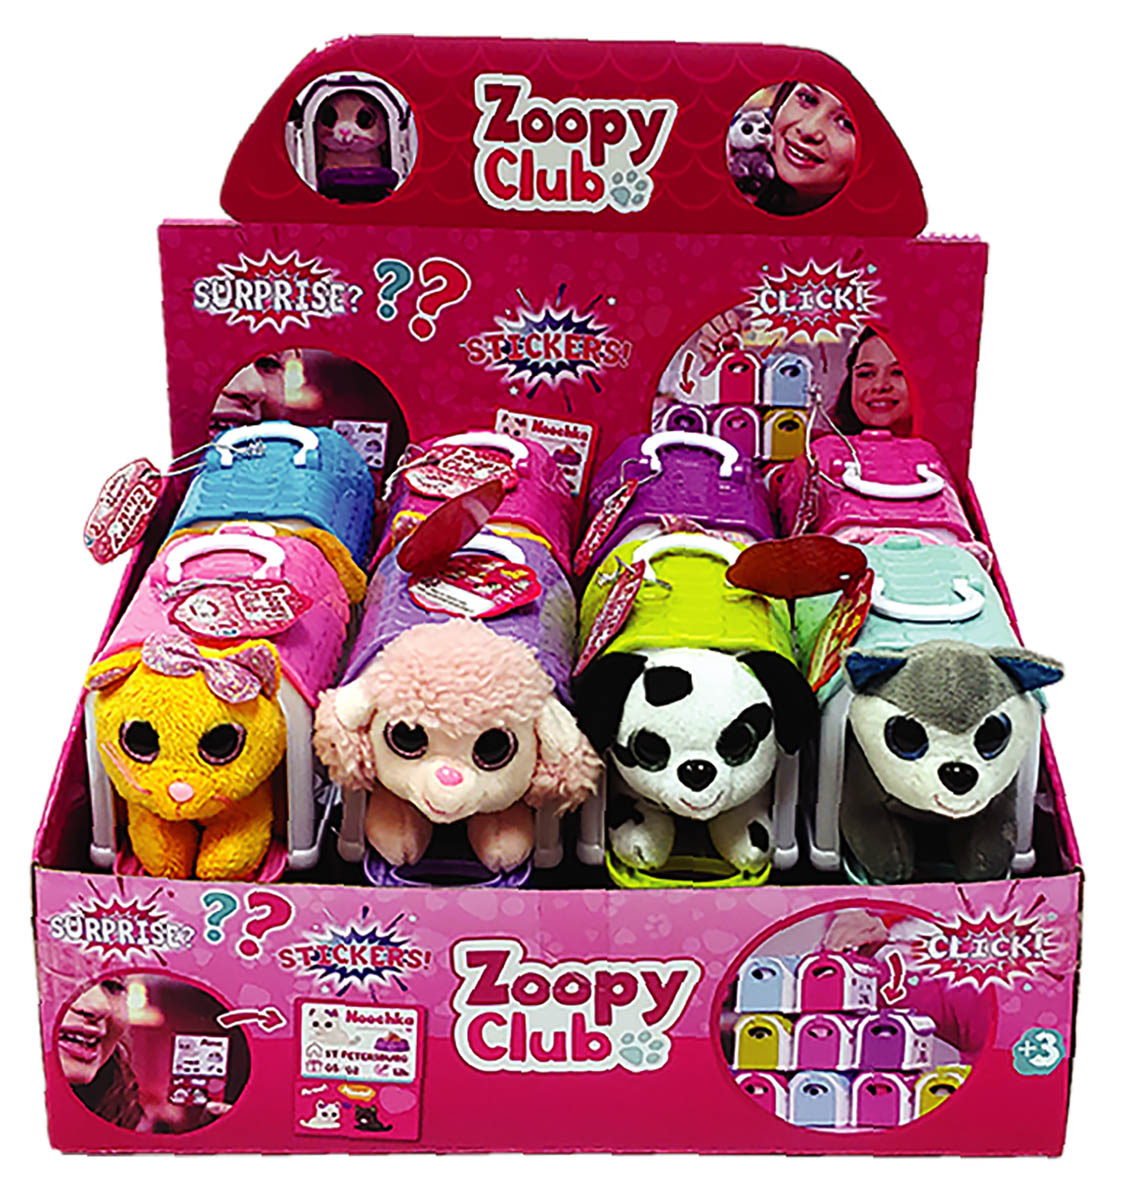 Zoopy Club Mini 16 pcs In Display (16 pieces - 8 styles)